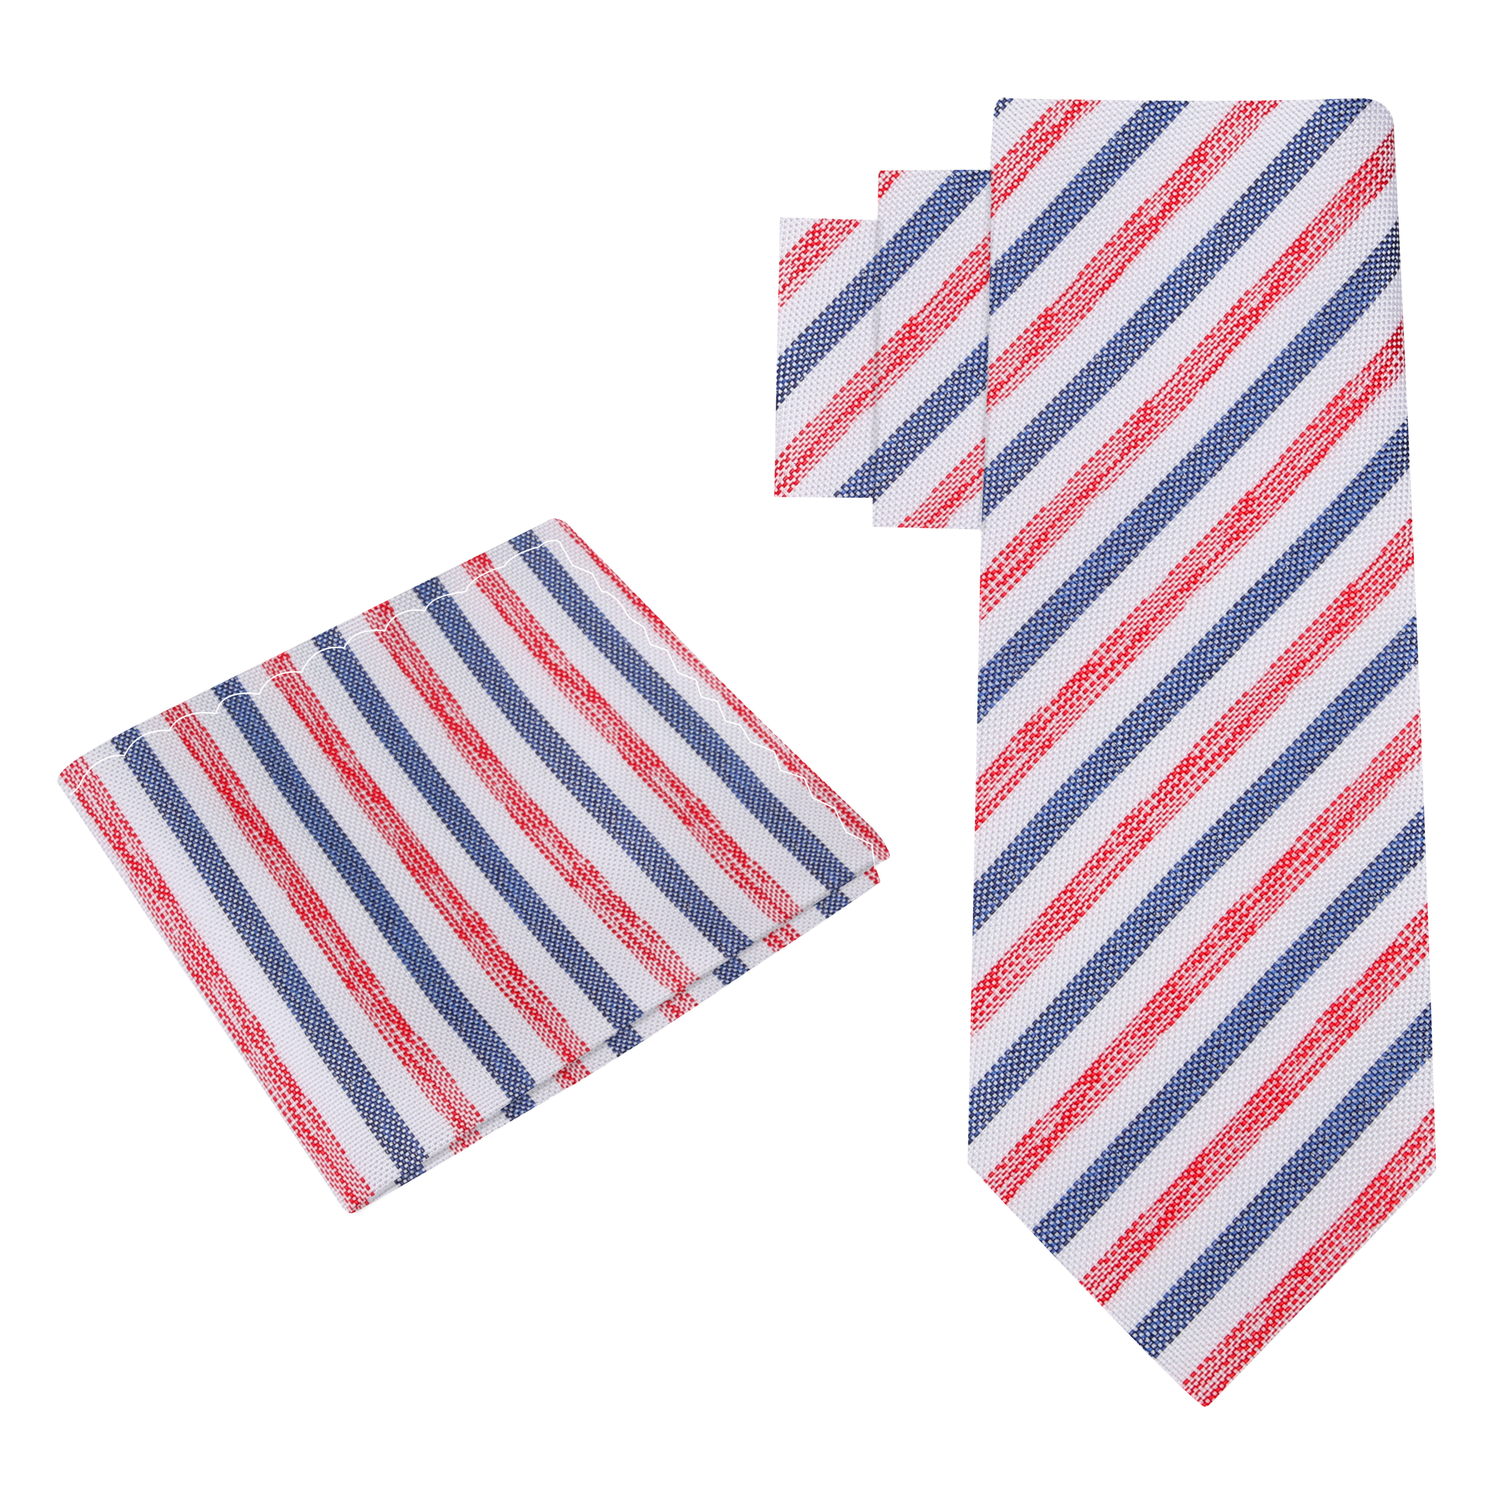 Alt View: White with Blue and Red Stripes Necktie Matching Square